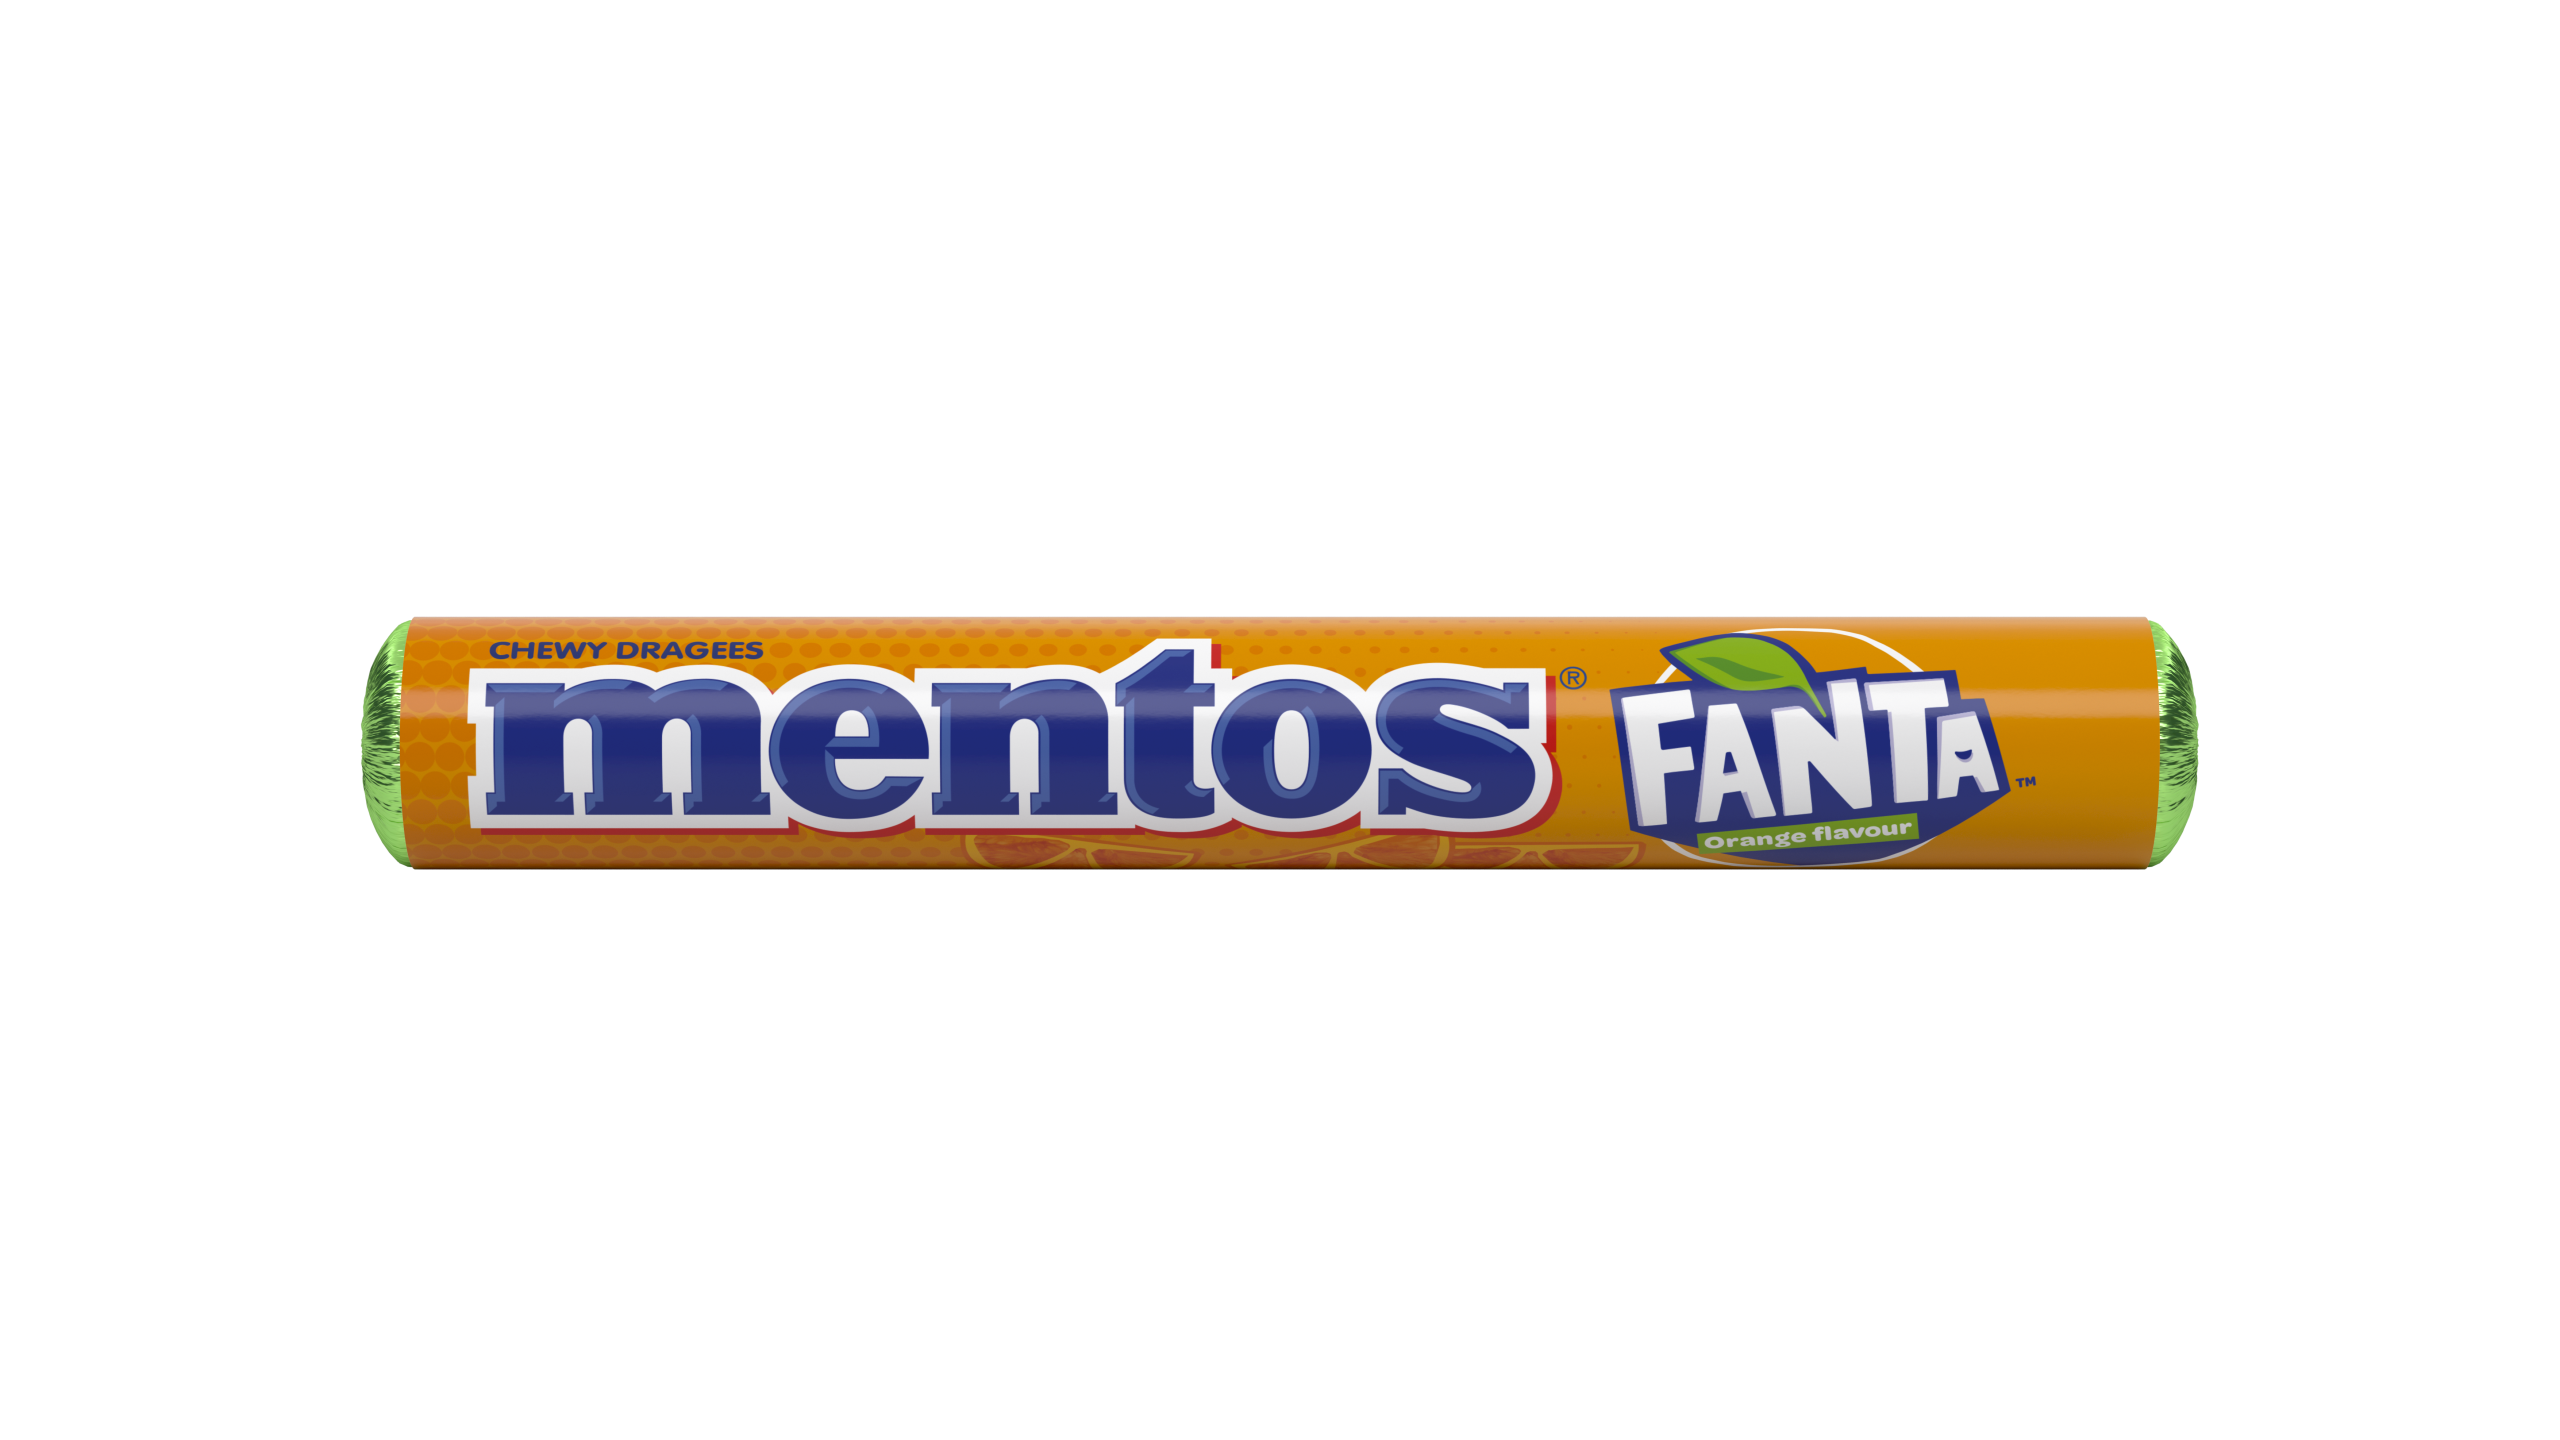 Mentos and Fanta team up to create new Mentos Chewy Candy